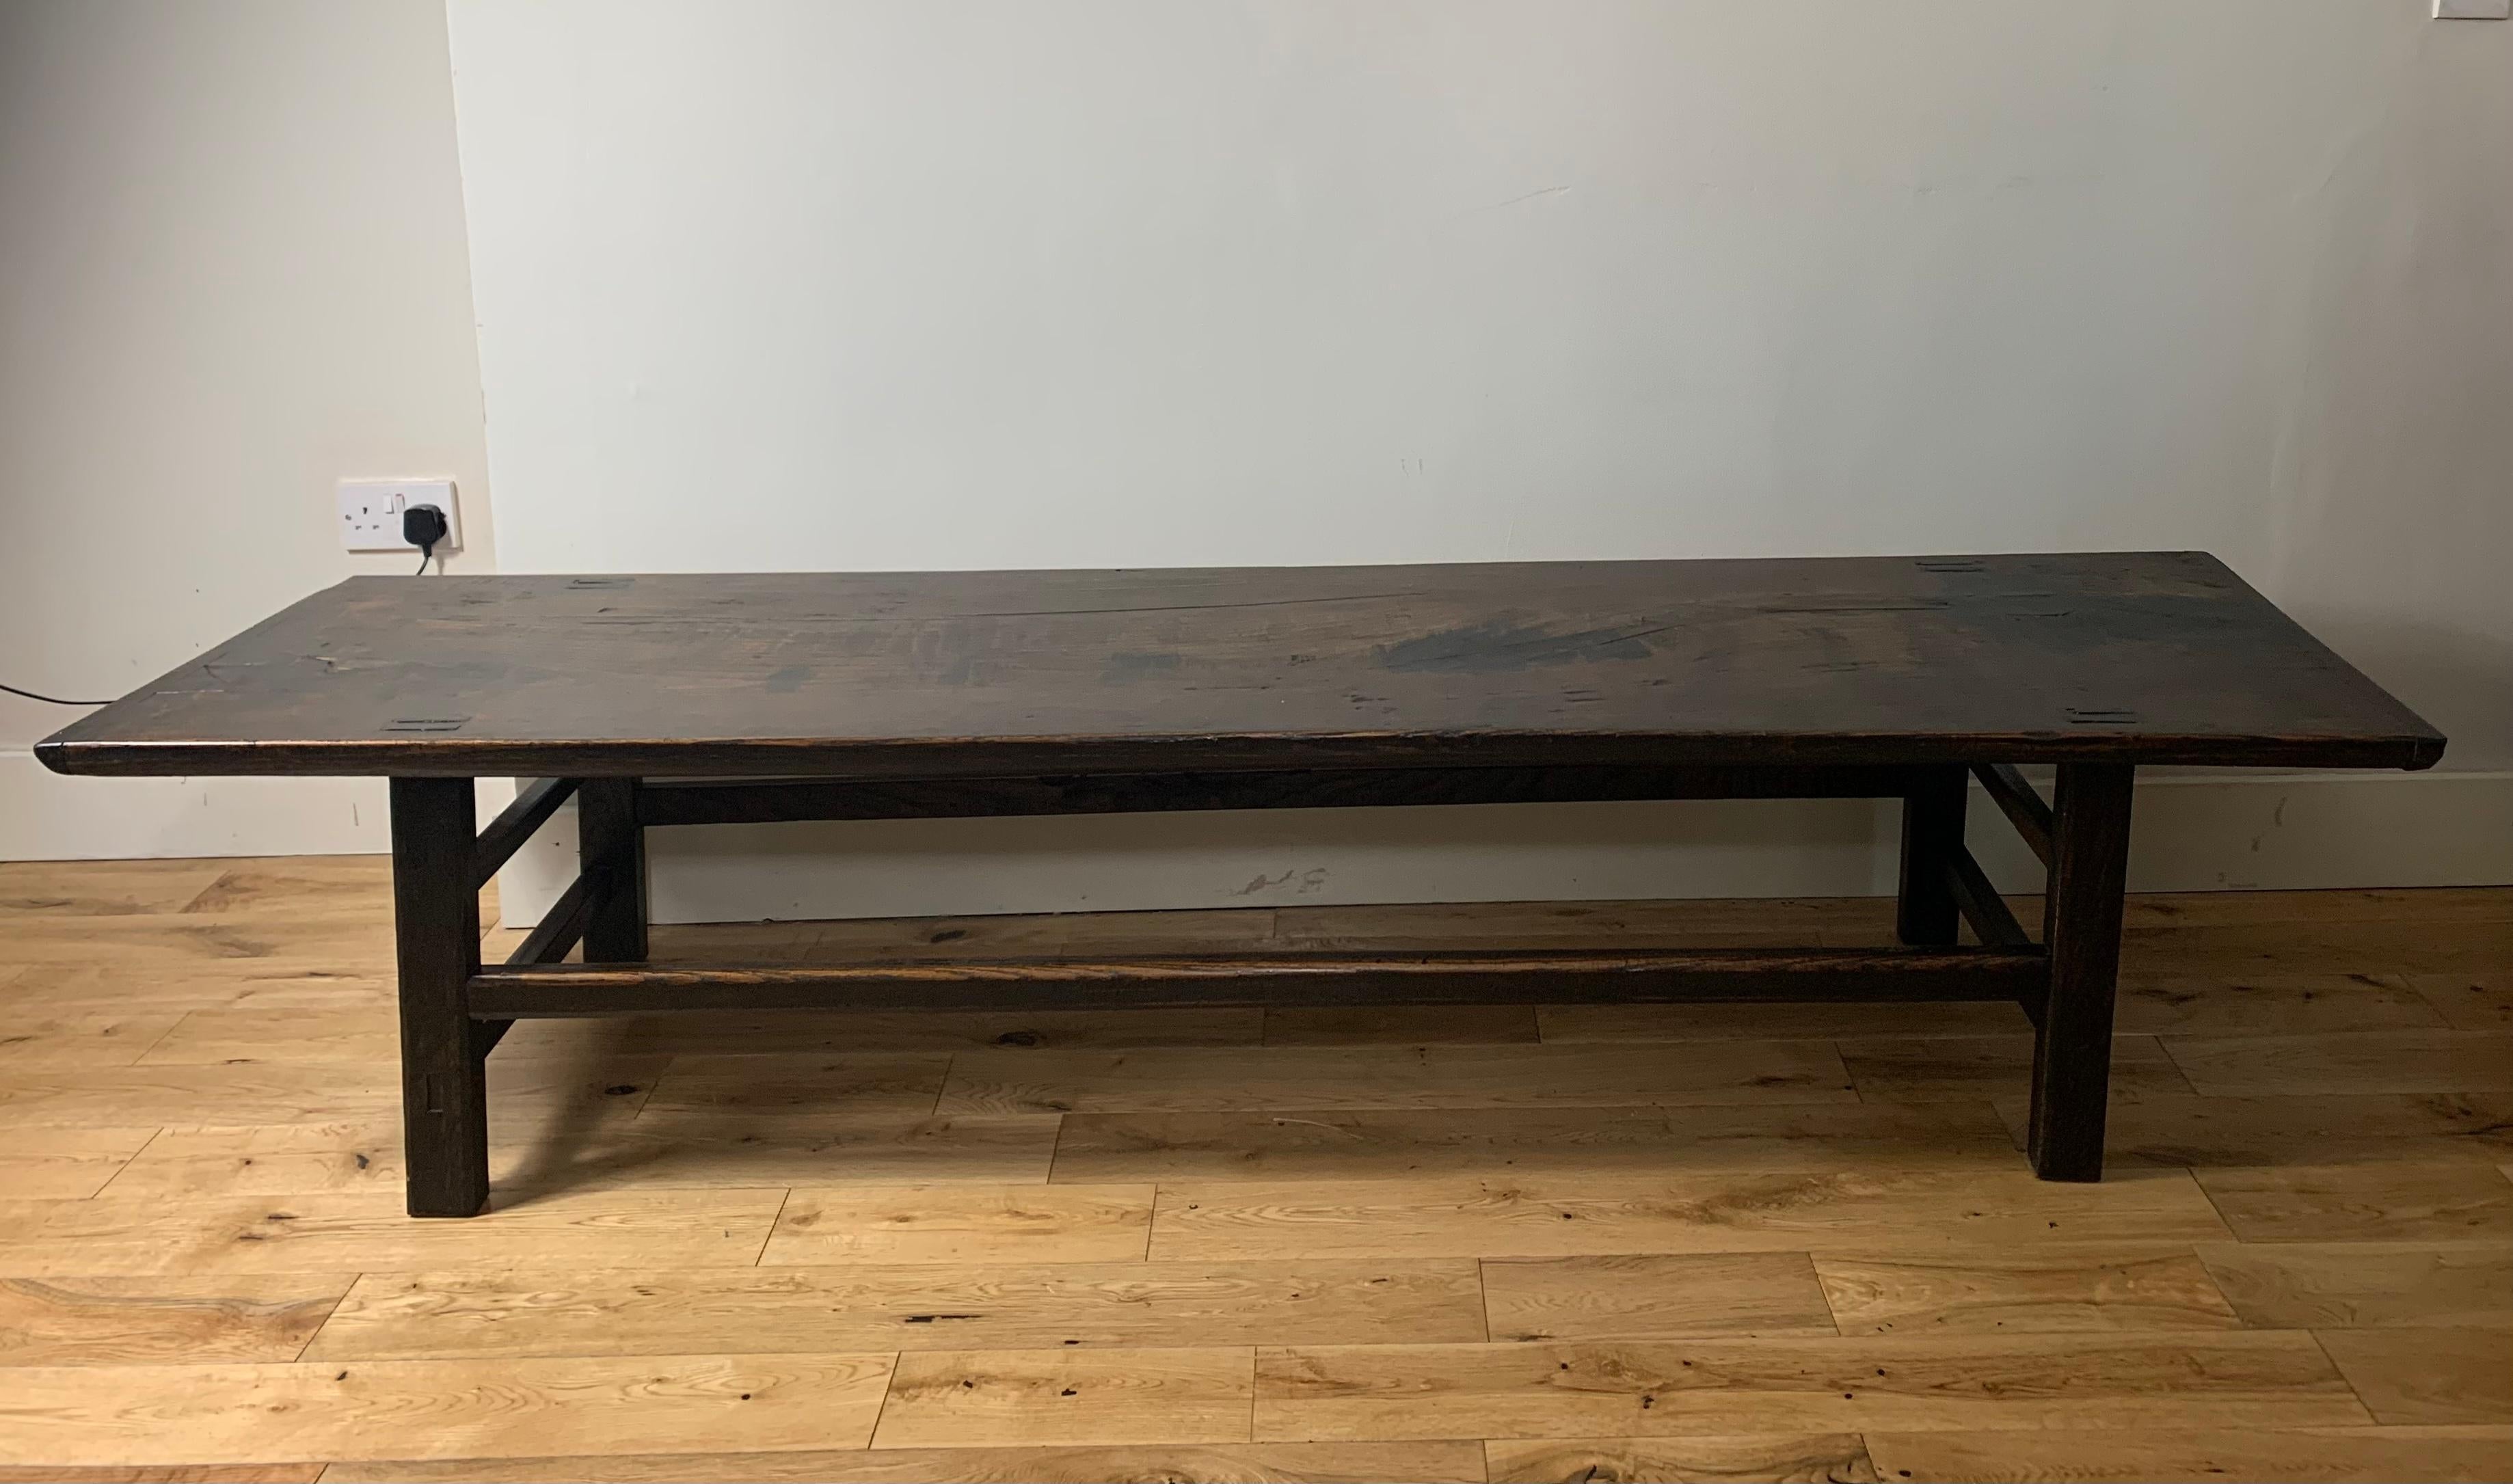 Chinese , Low Table  / Daybed dating to the latter part of the 18th century . 

Solid elm wood , generous proportions , traditional design, solid thick single plank top with cleated ends , mortise and tenon construction. Wonderful colour and amazing